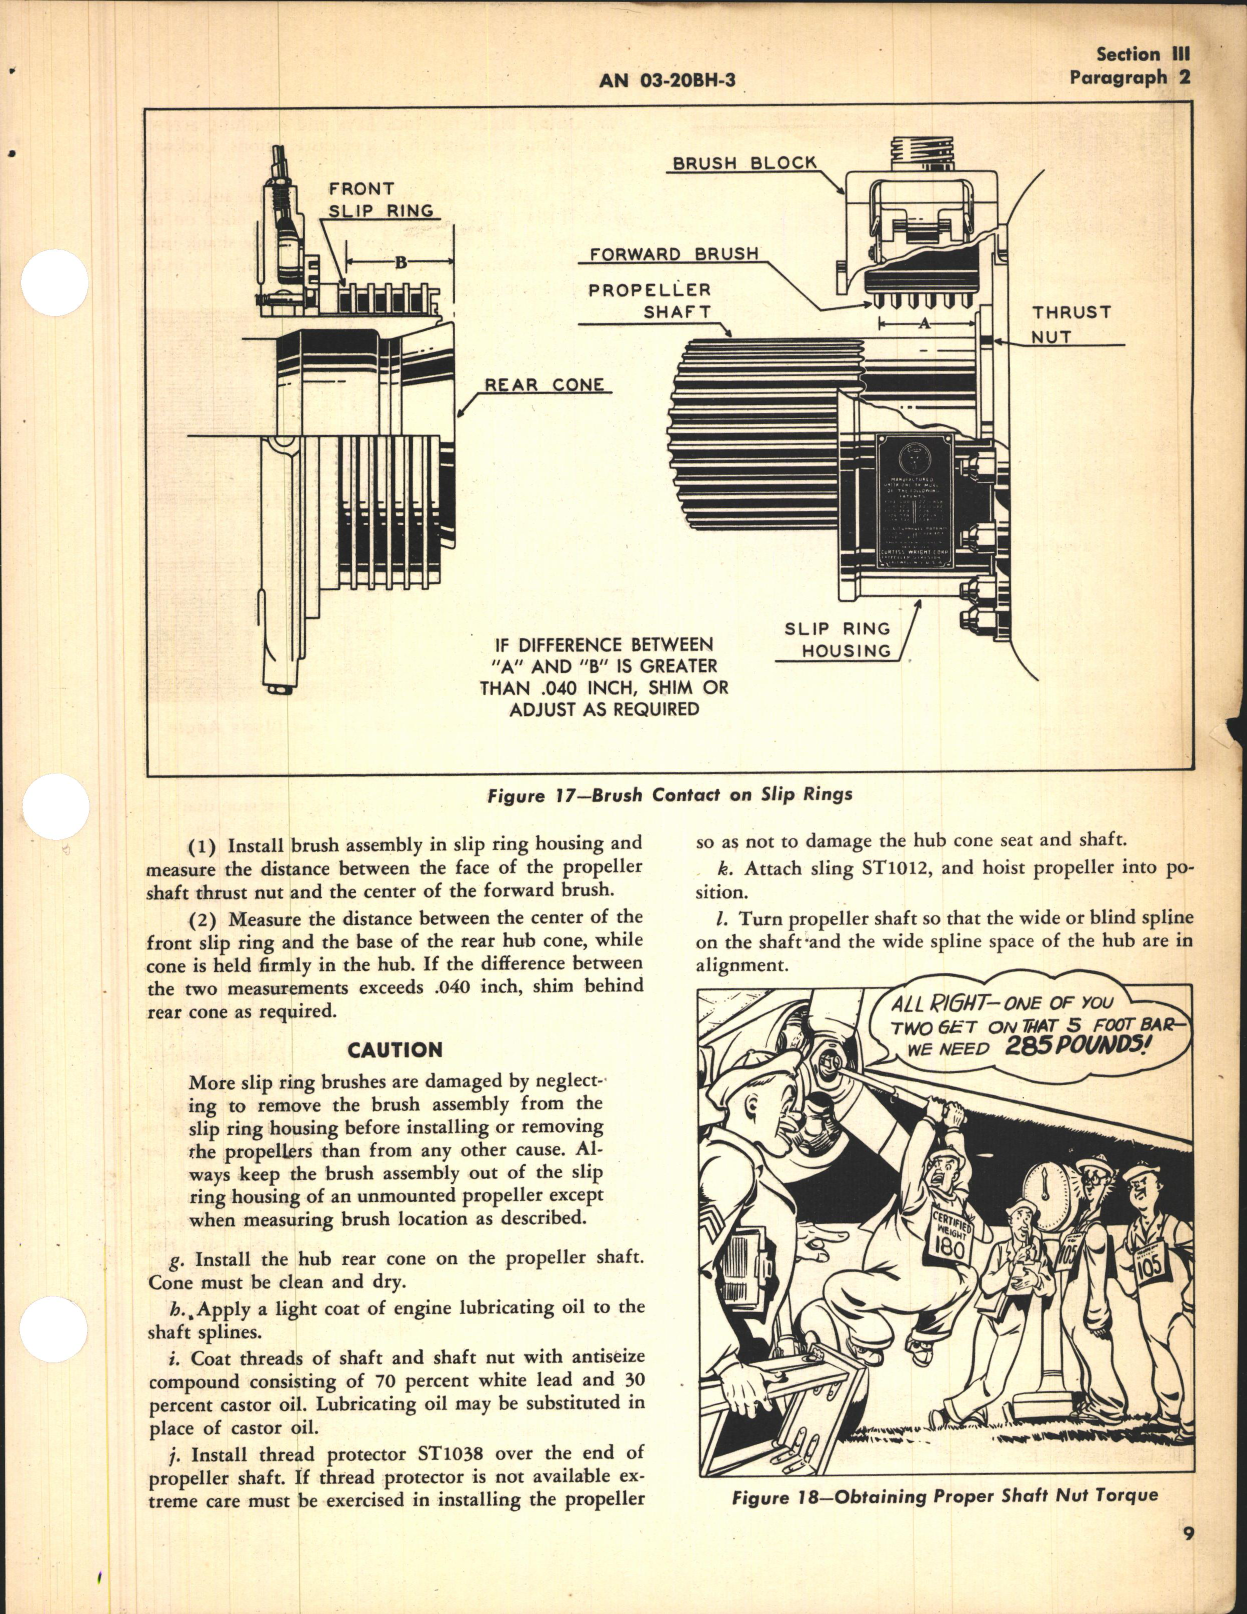 Sample page 7 from AirCorps Library document: Operation, Service, & Overhaul Instructions with Parts Catalog for Electric Propellers